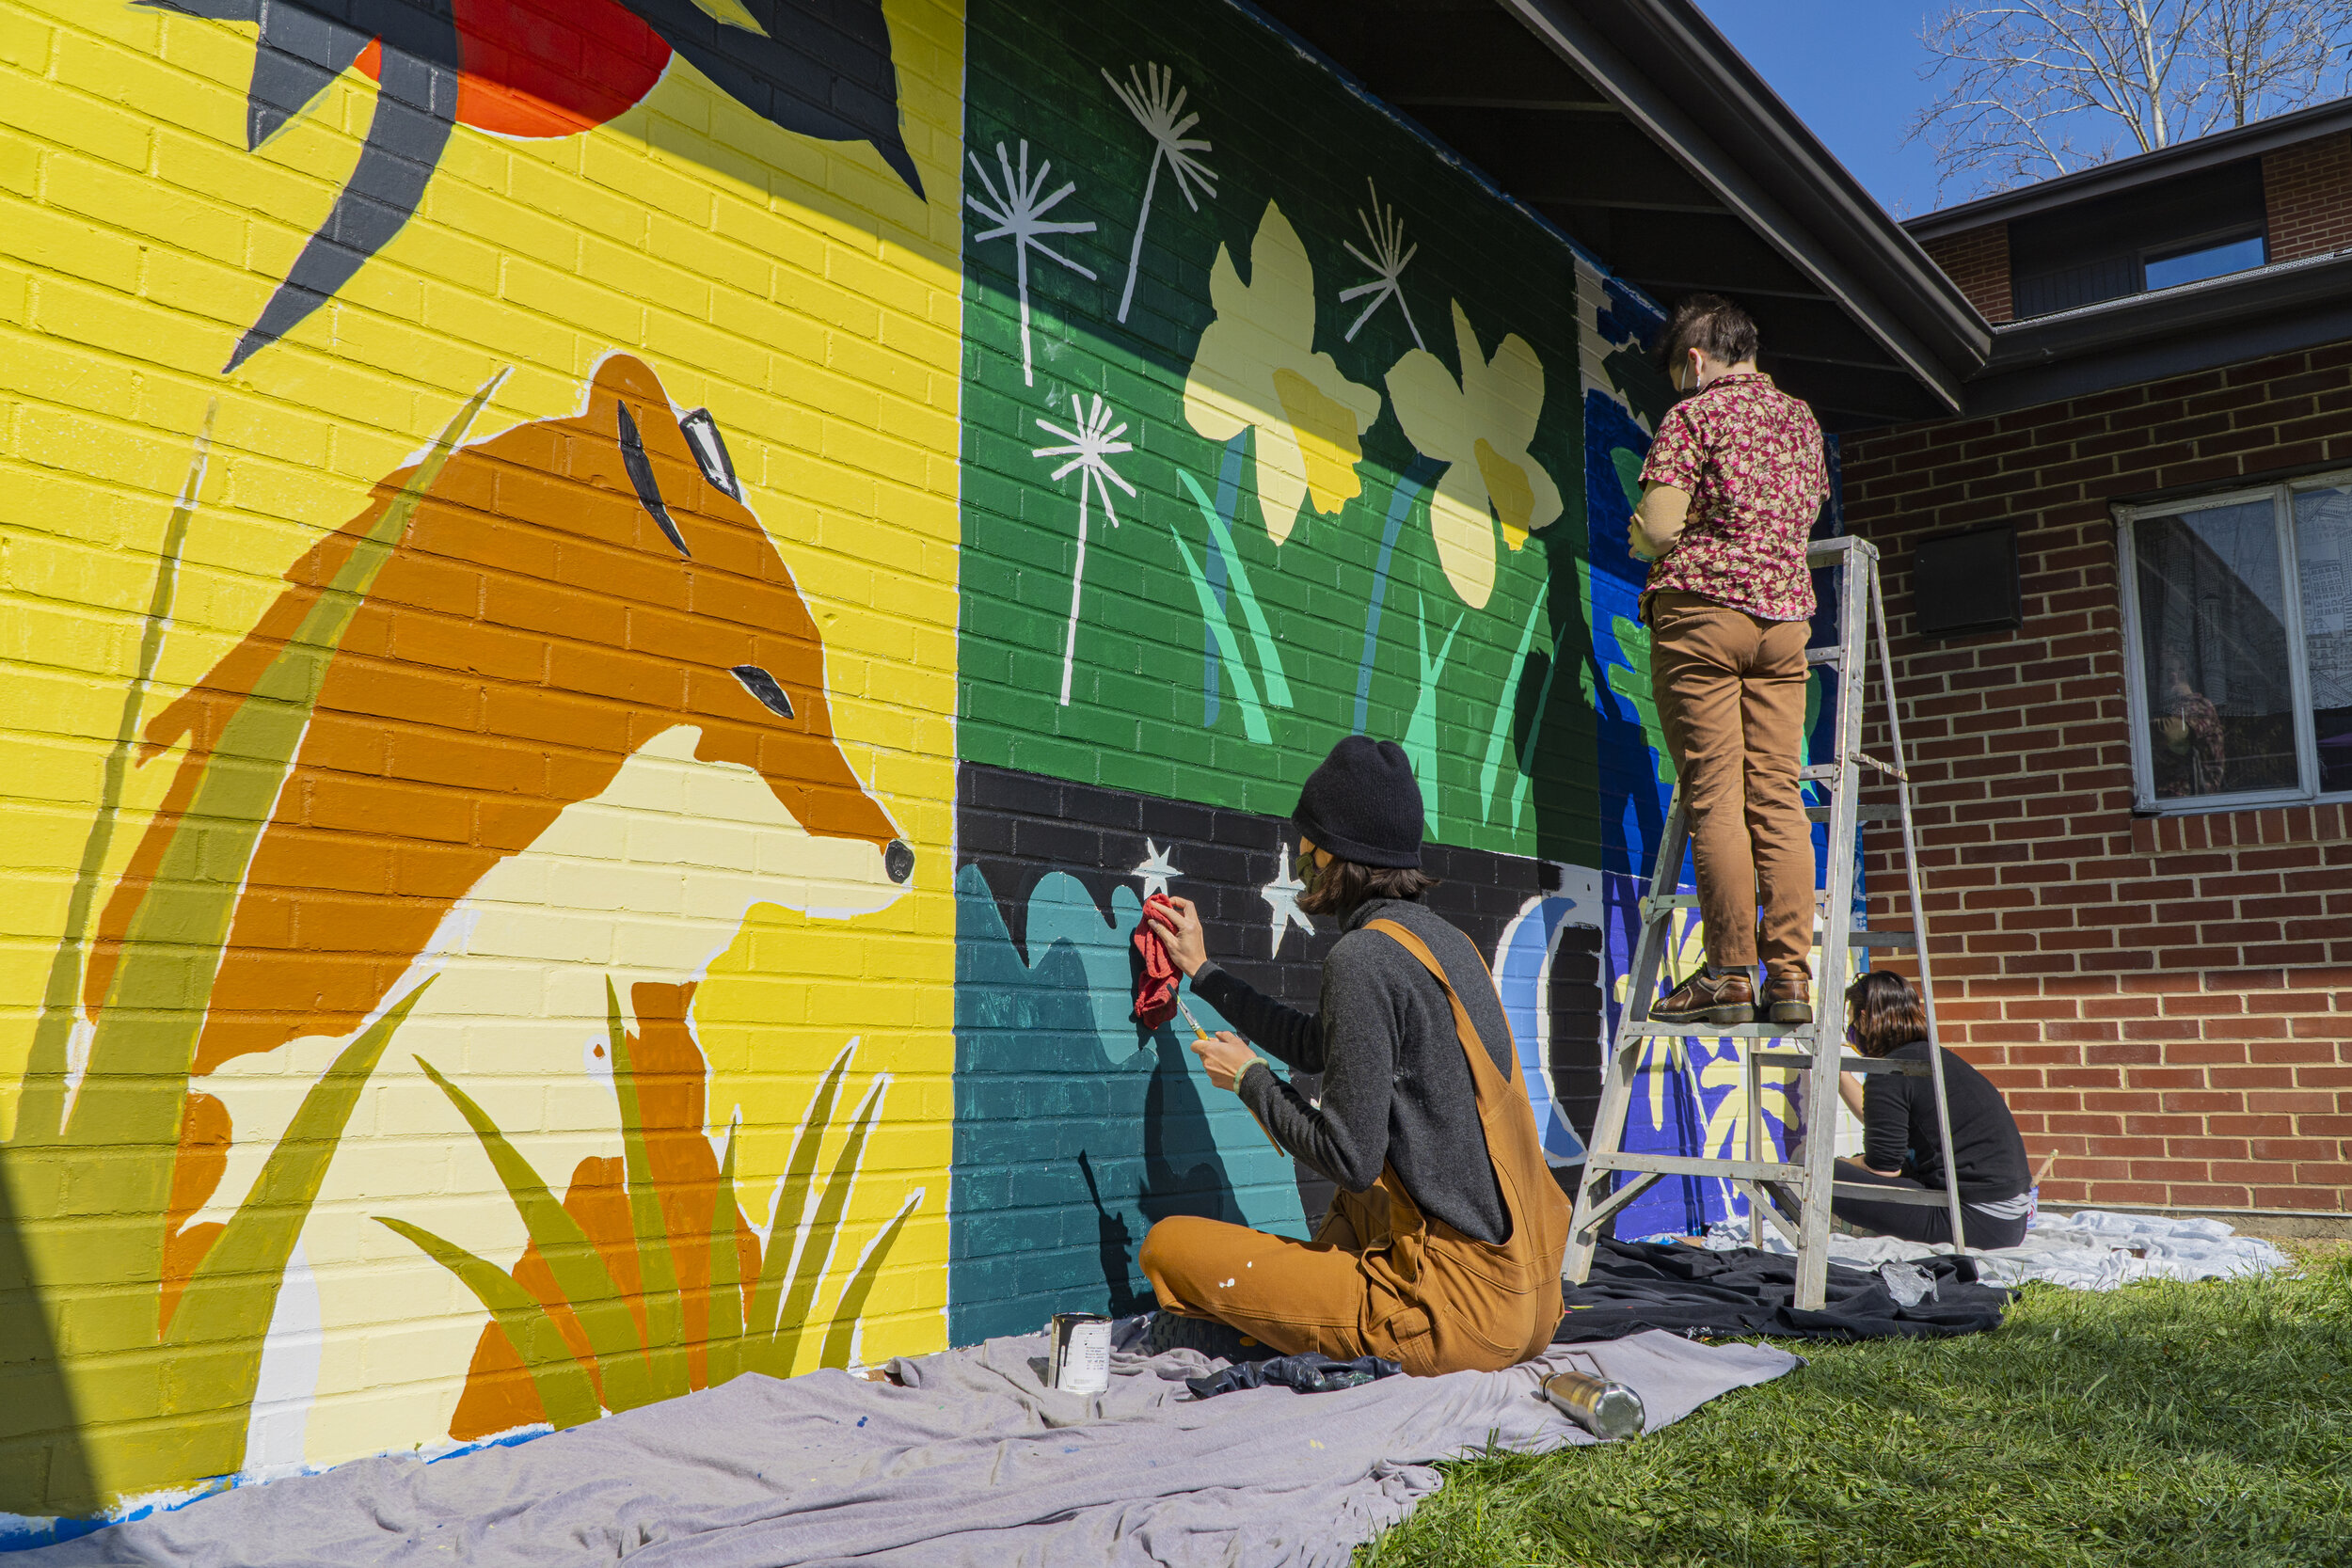 Students  continue working on the mural using ladders to reach all areas. (Rob Nguyen/TKS)